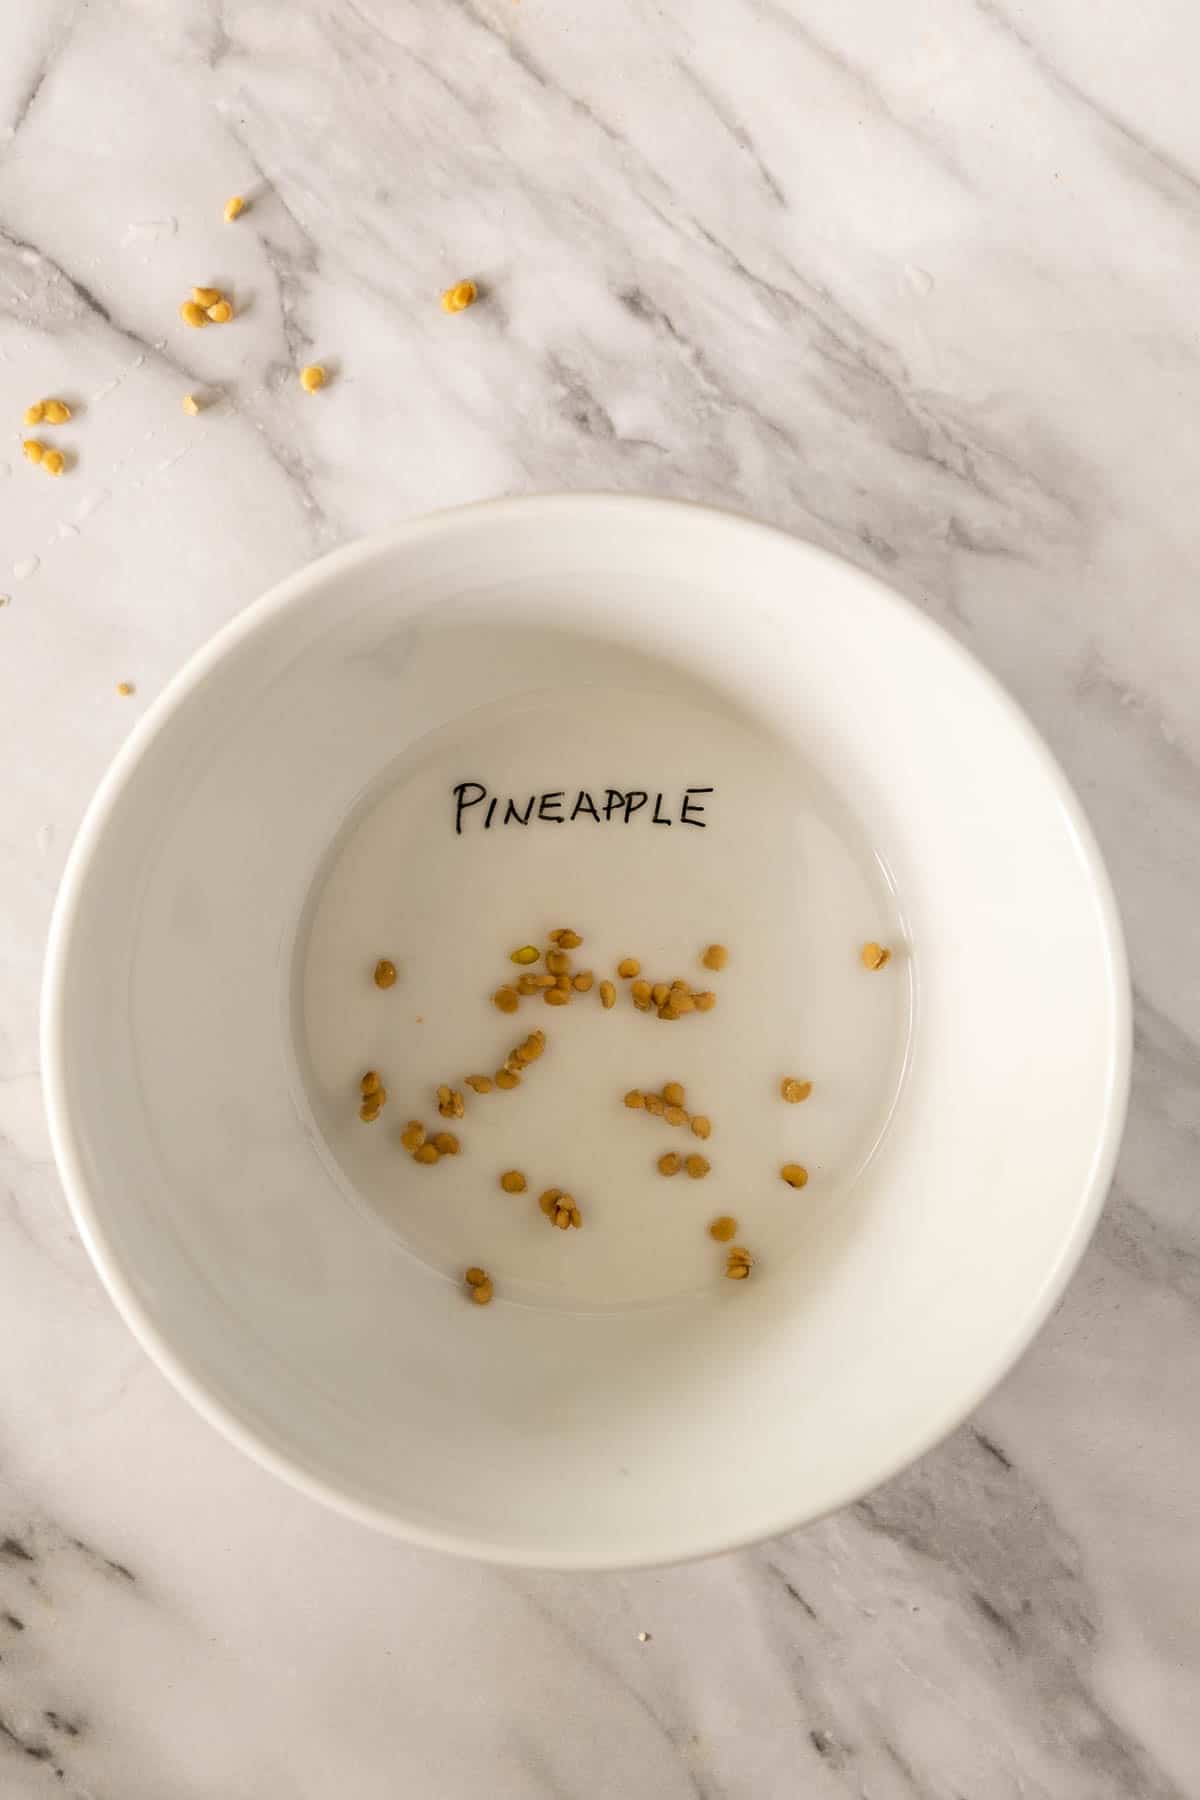 Cleaned Pineapple tomato seeds sit at the bottom of a white bowl.